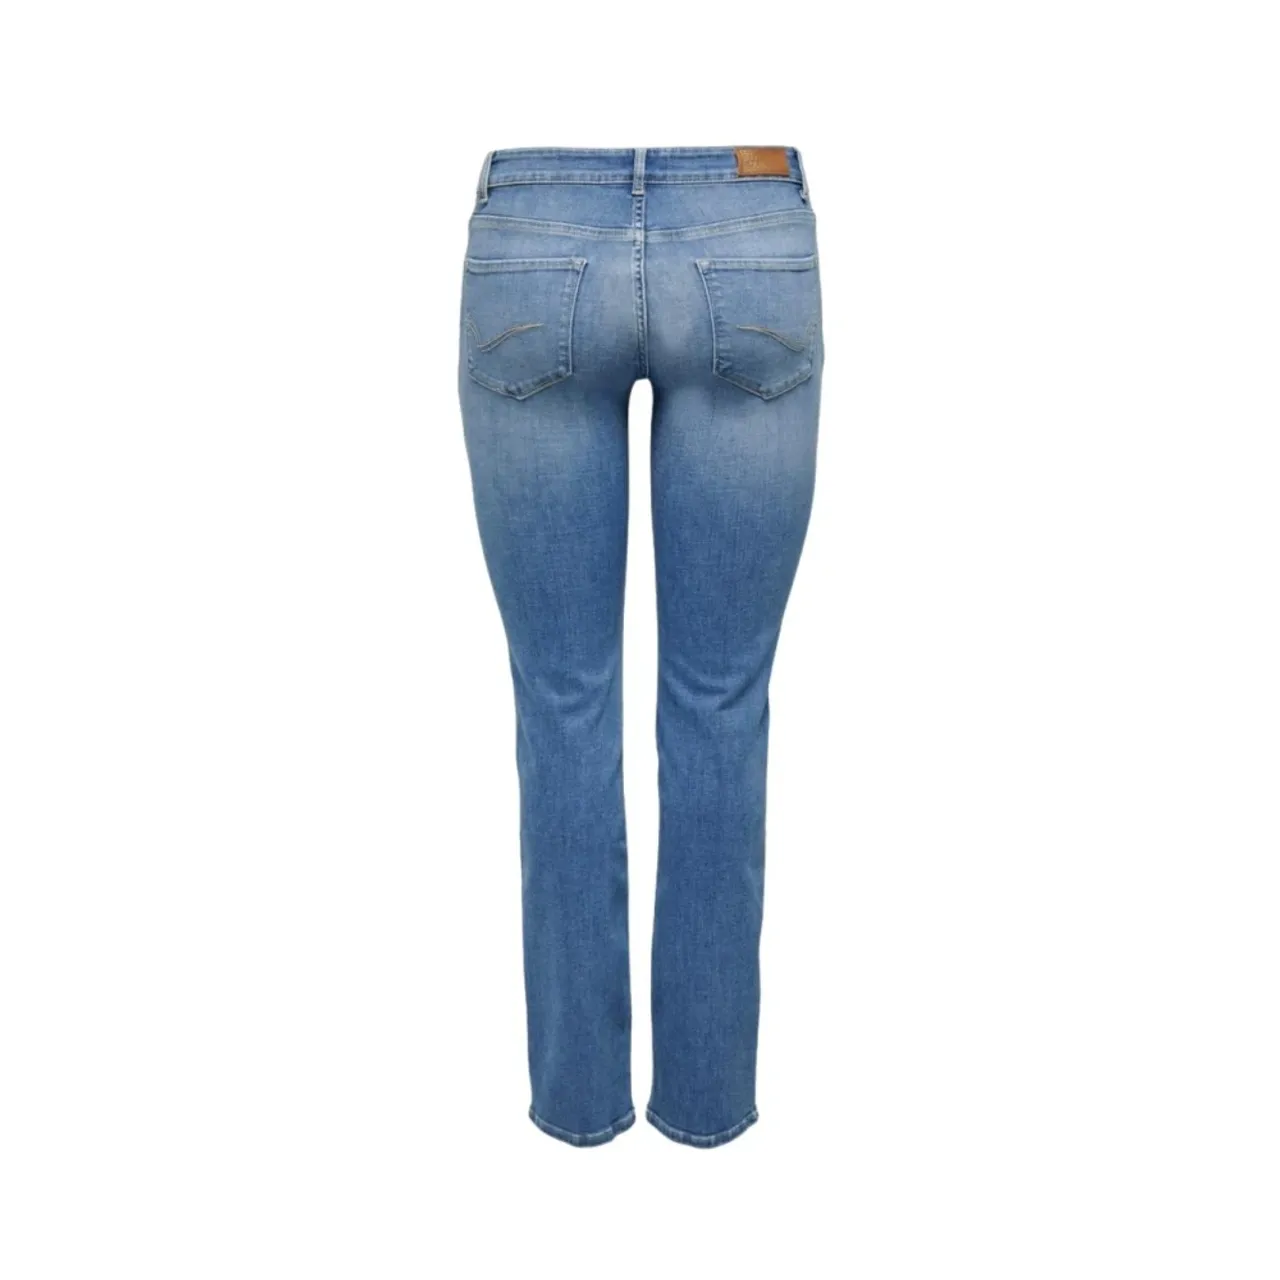 Only , Classic Denim Jeans ,Blue female, Sizes: